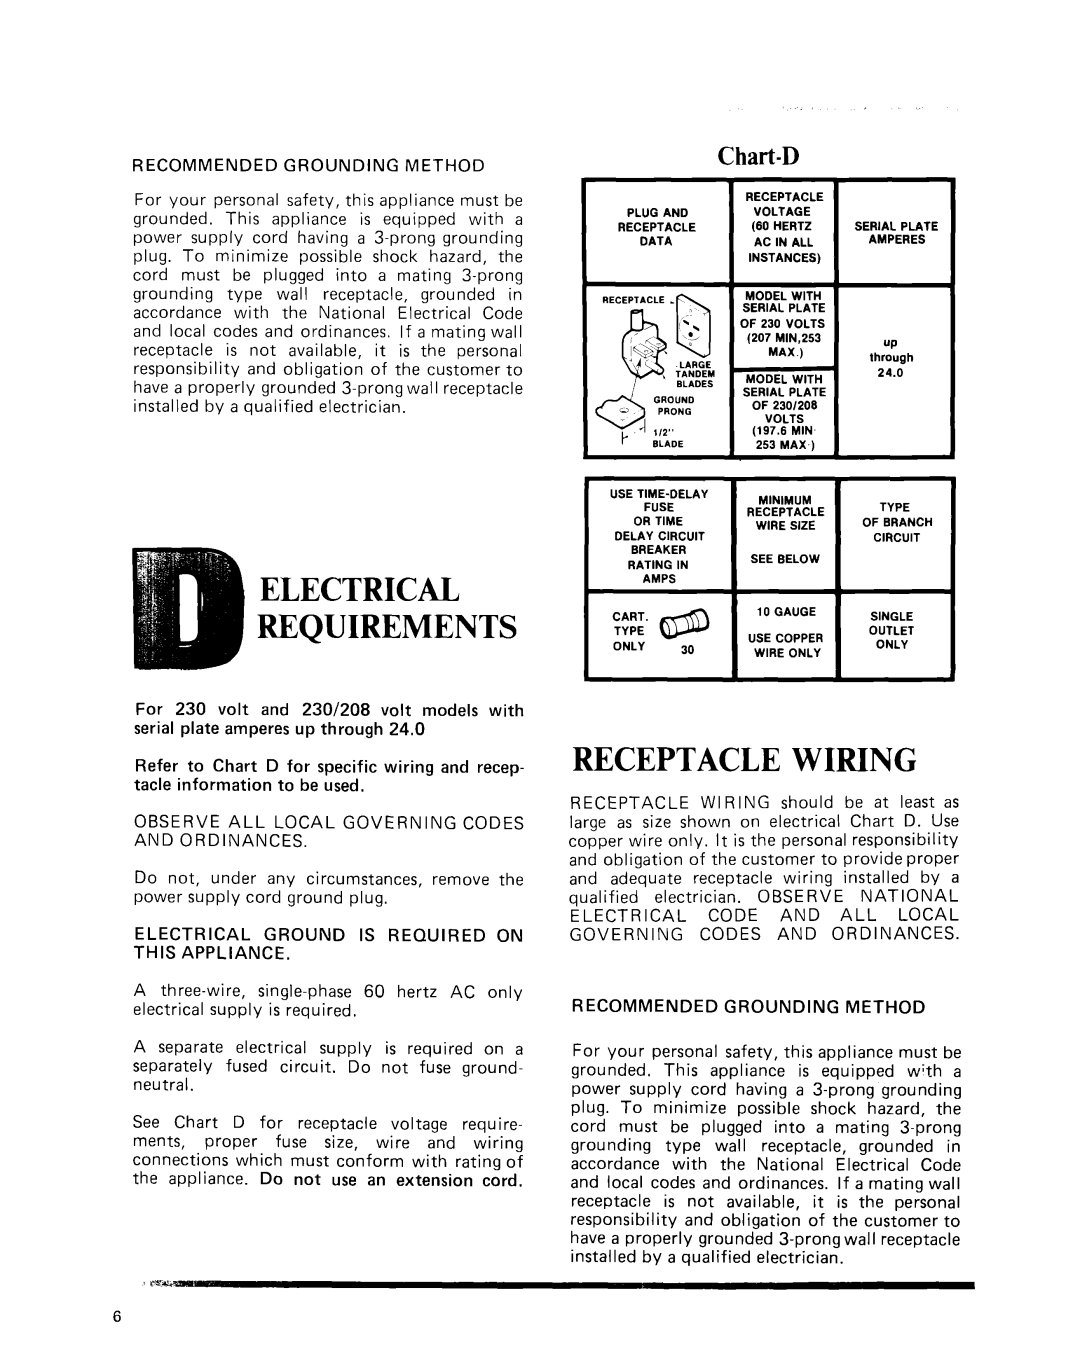 Whirlpool Air Conditioner manual Chart-D, Electrical Requirements, Receptacle Wiring 